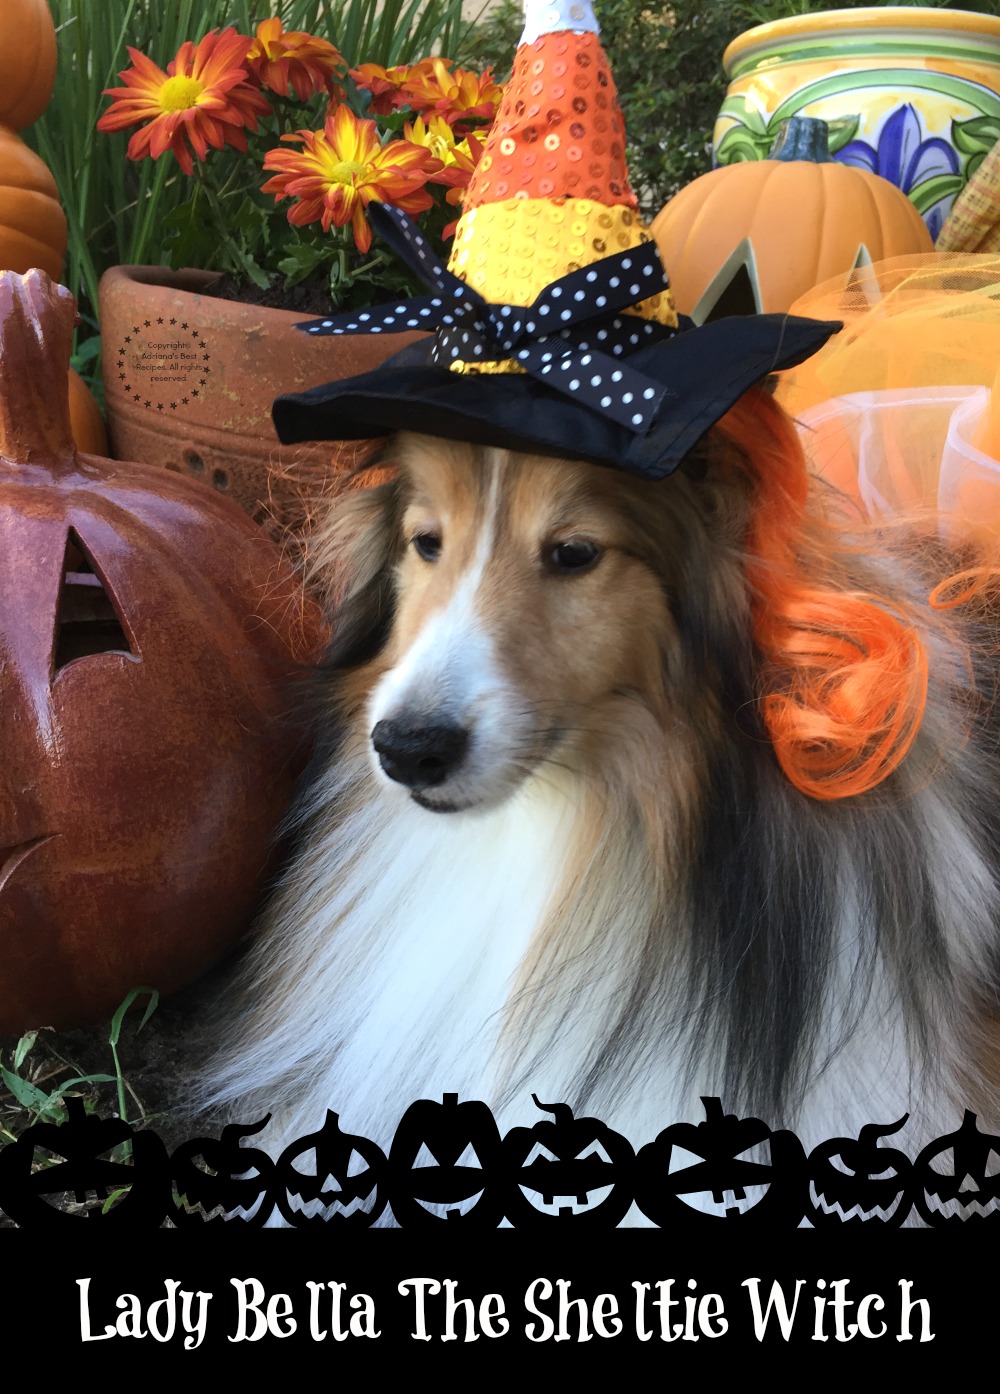 Lady Bella The Sheltie Witch